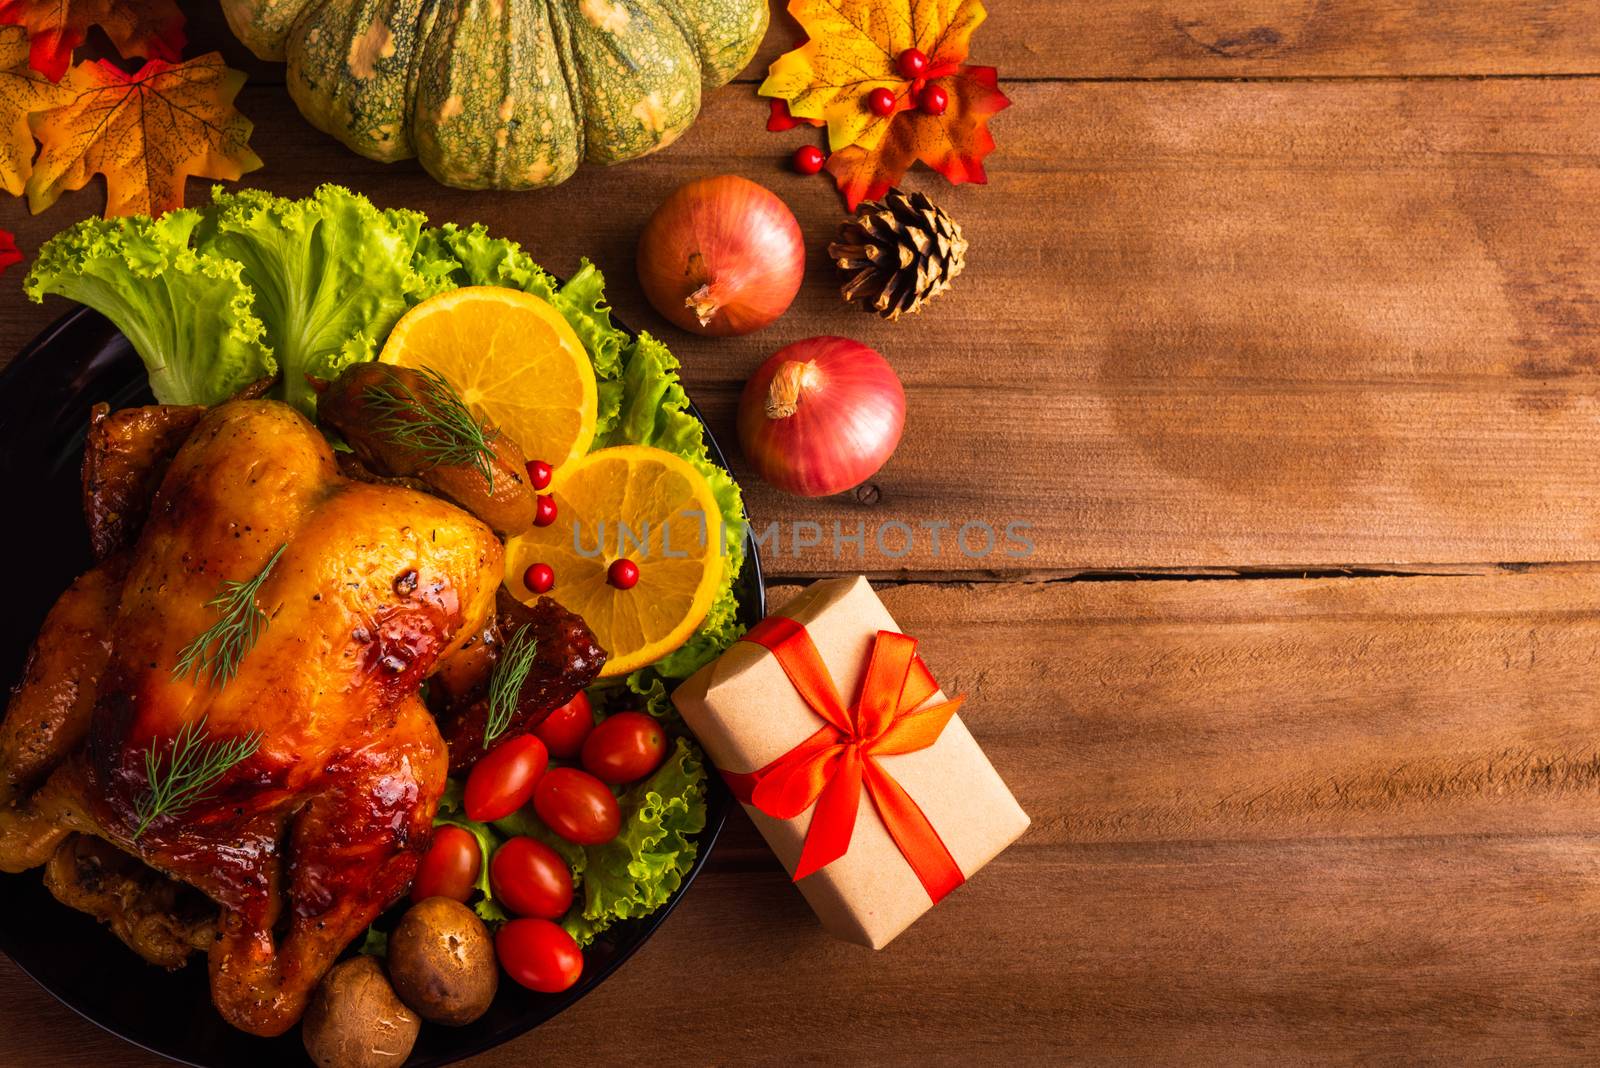 Thanksgiving baked turkey or chicken and vegetables, Christmas dinner feast food decoration, studio shot on wooden table background, Happy thanksgiving day of holiday concept